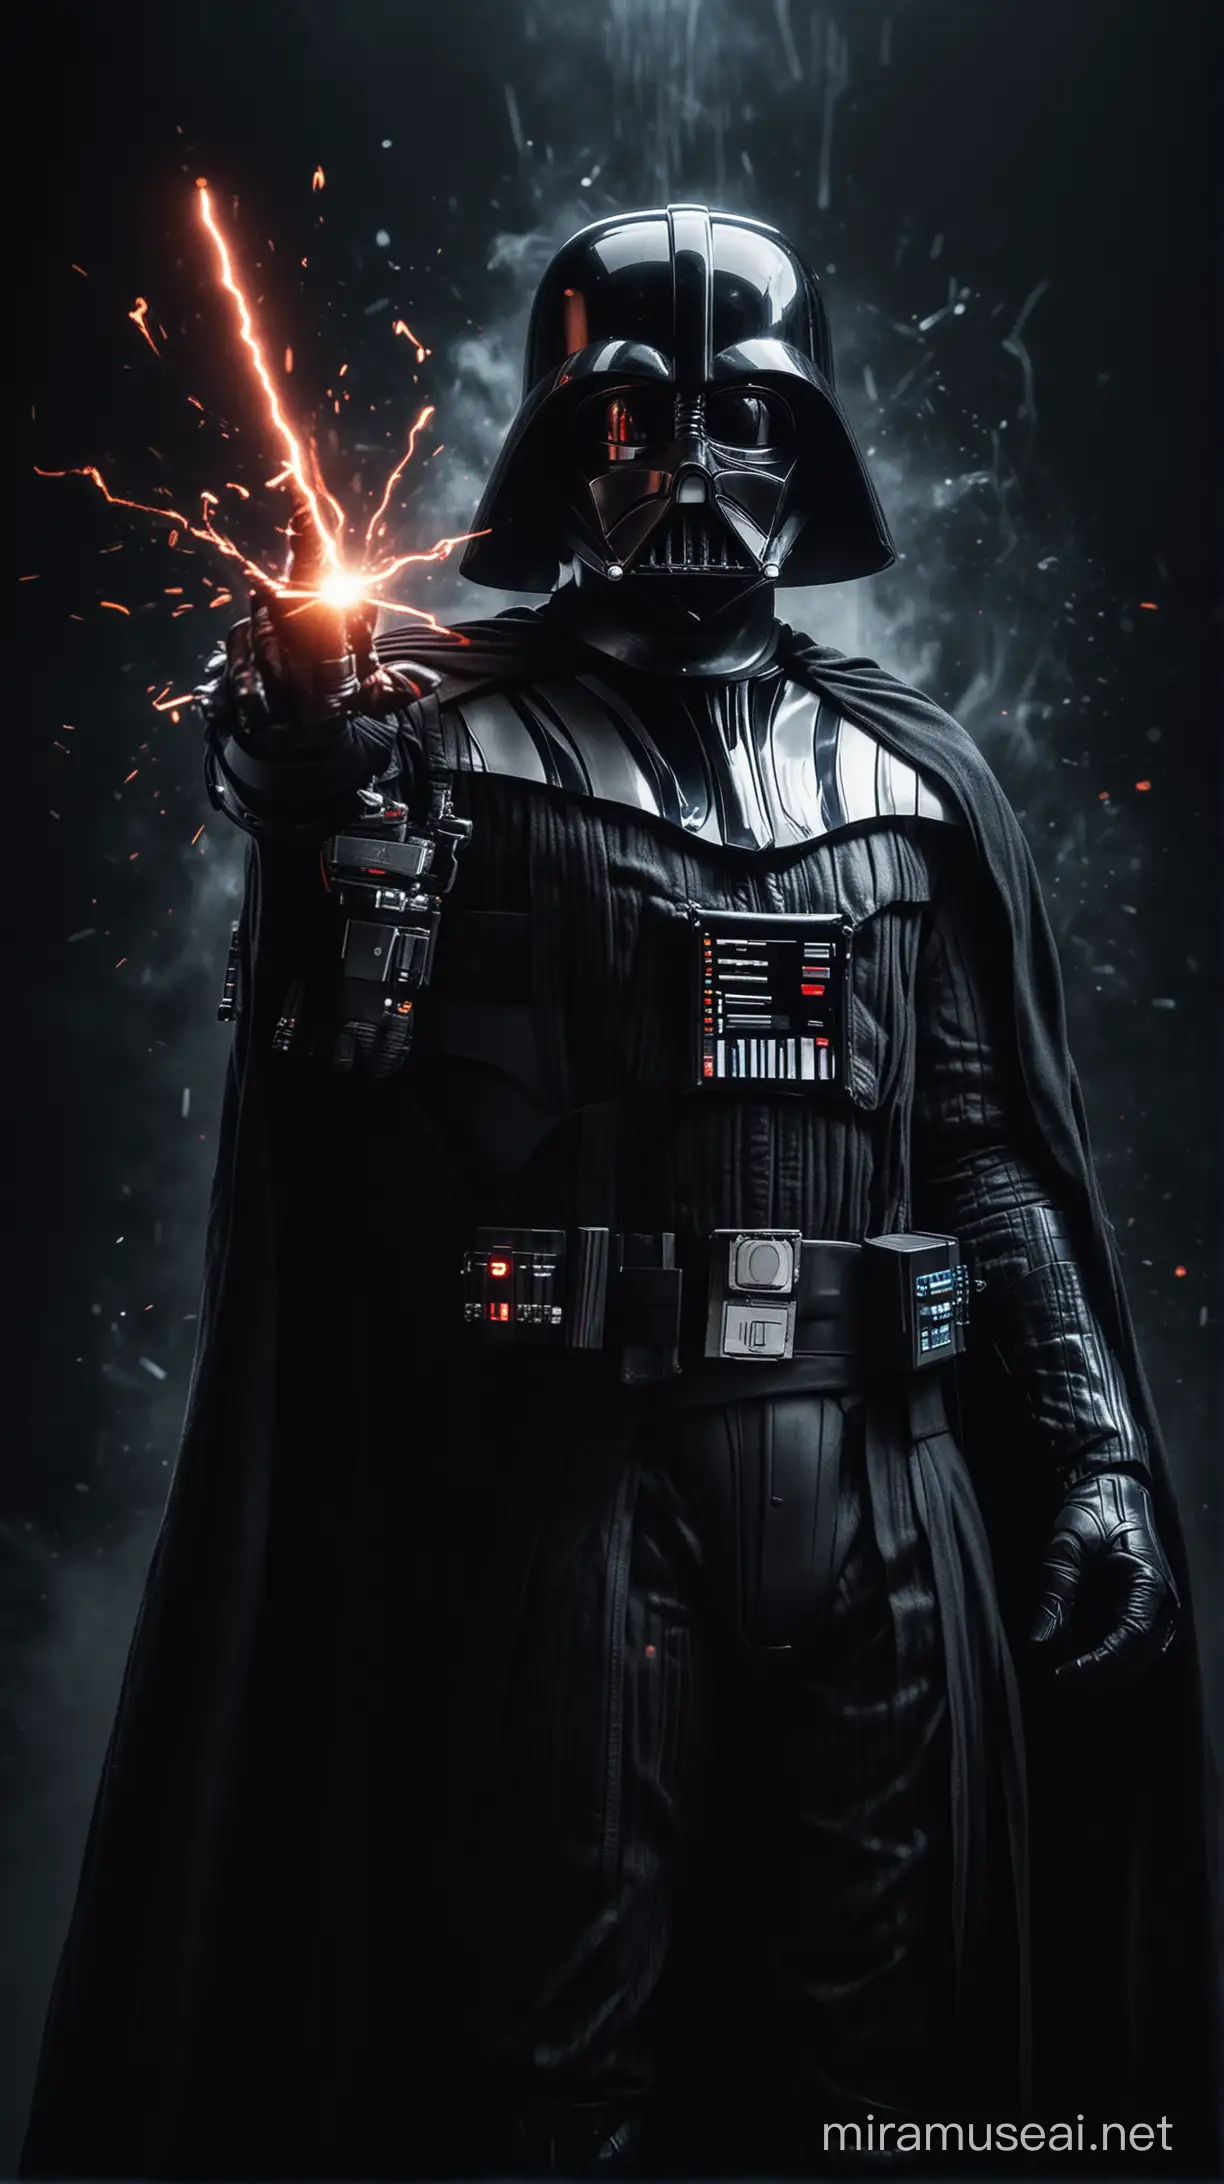 A cool photo of darth vader, he using powers, dark theme 